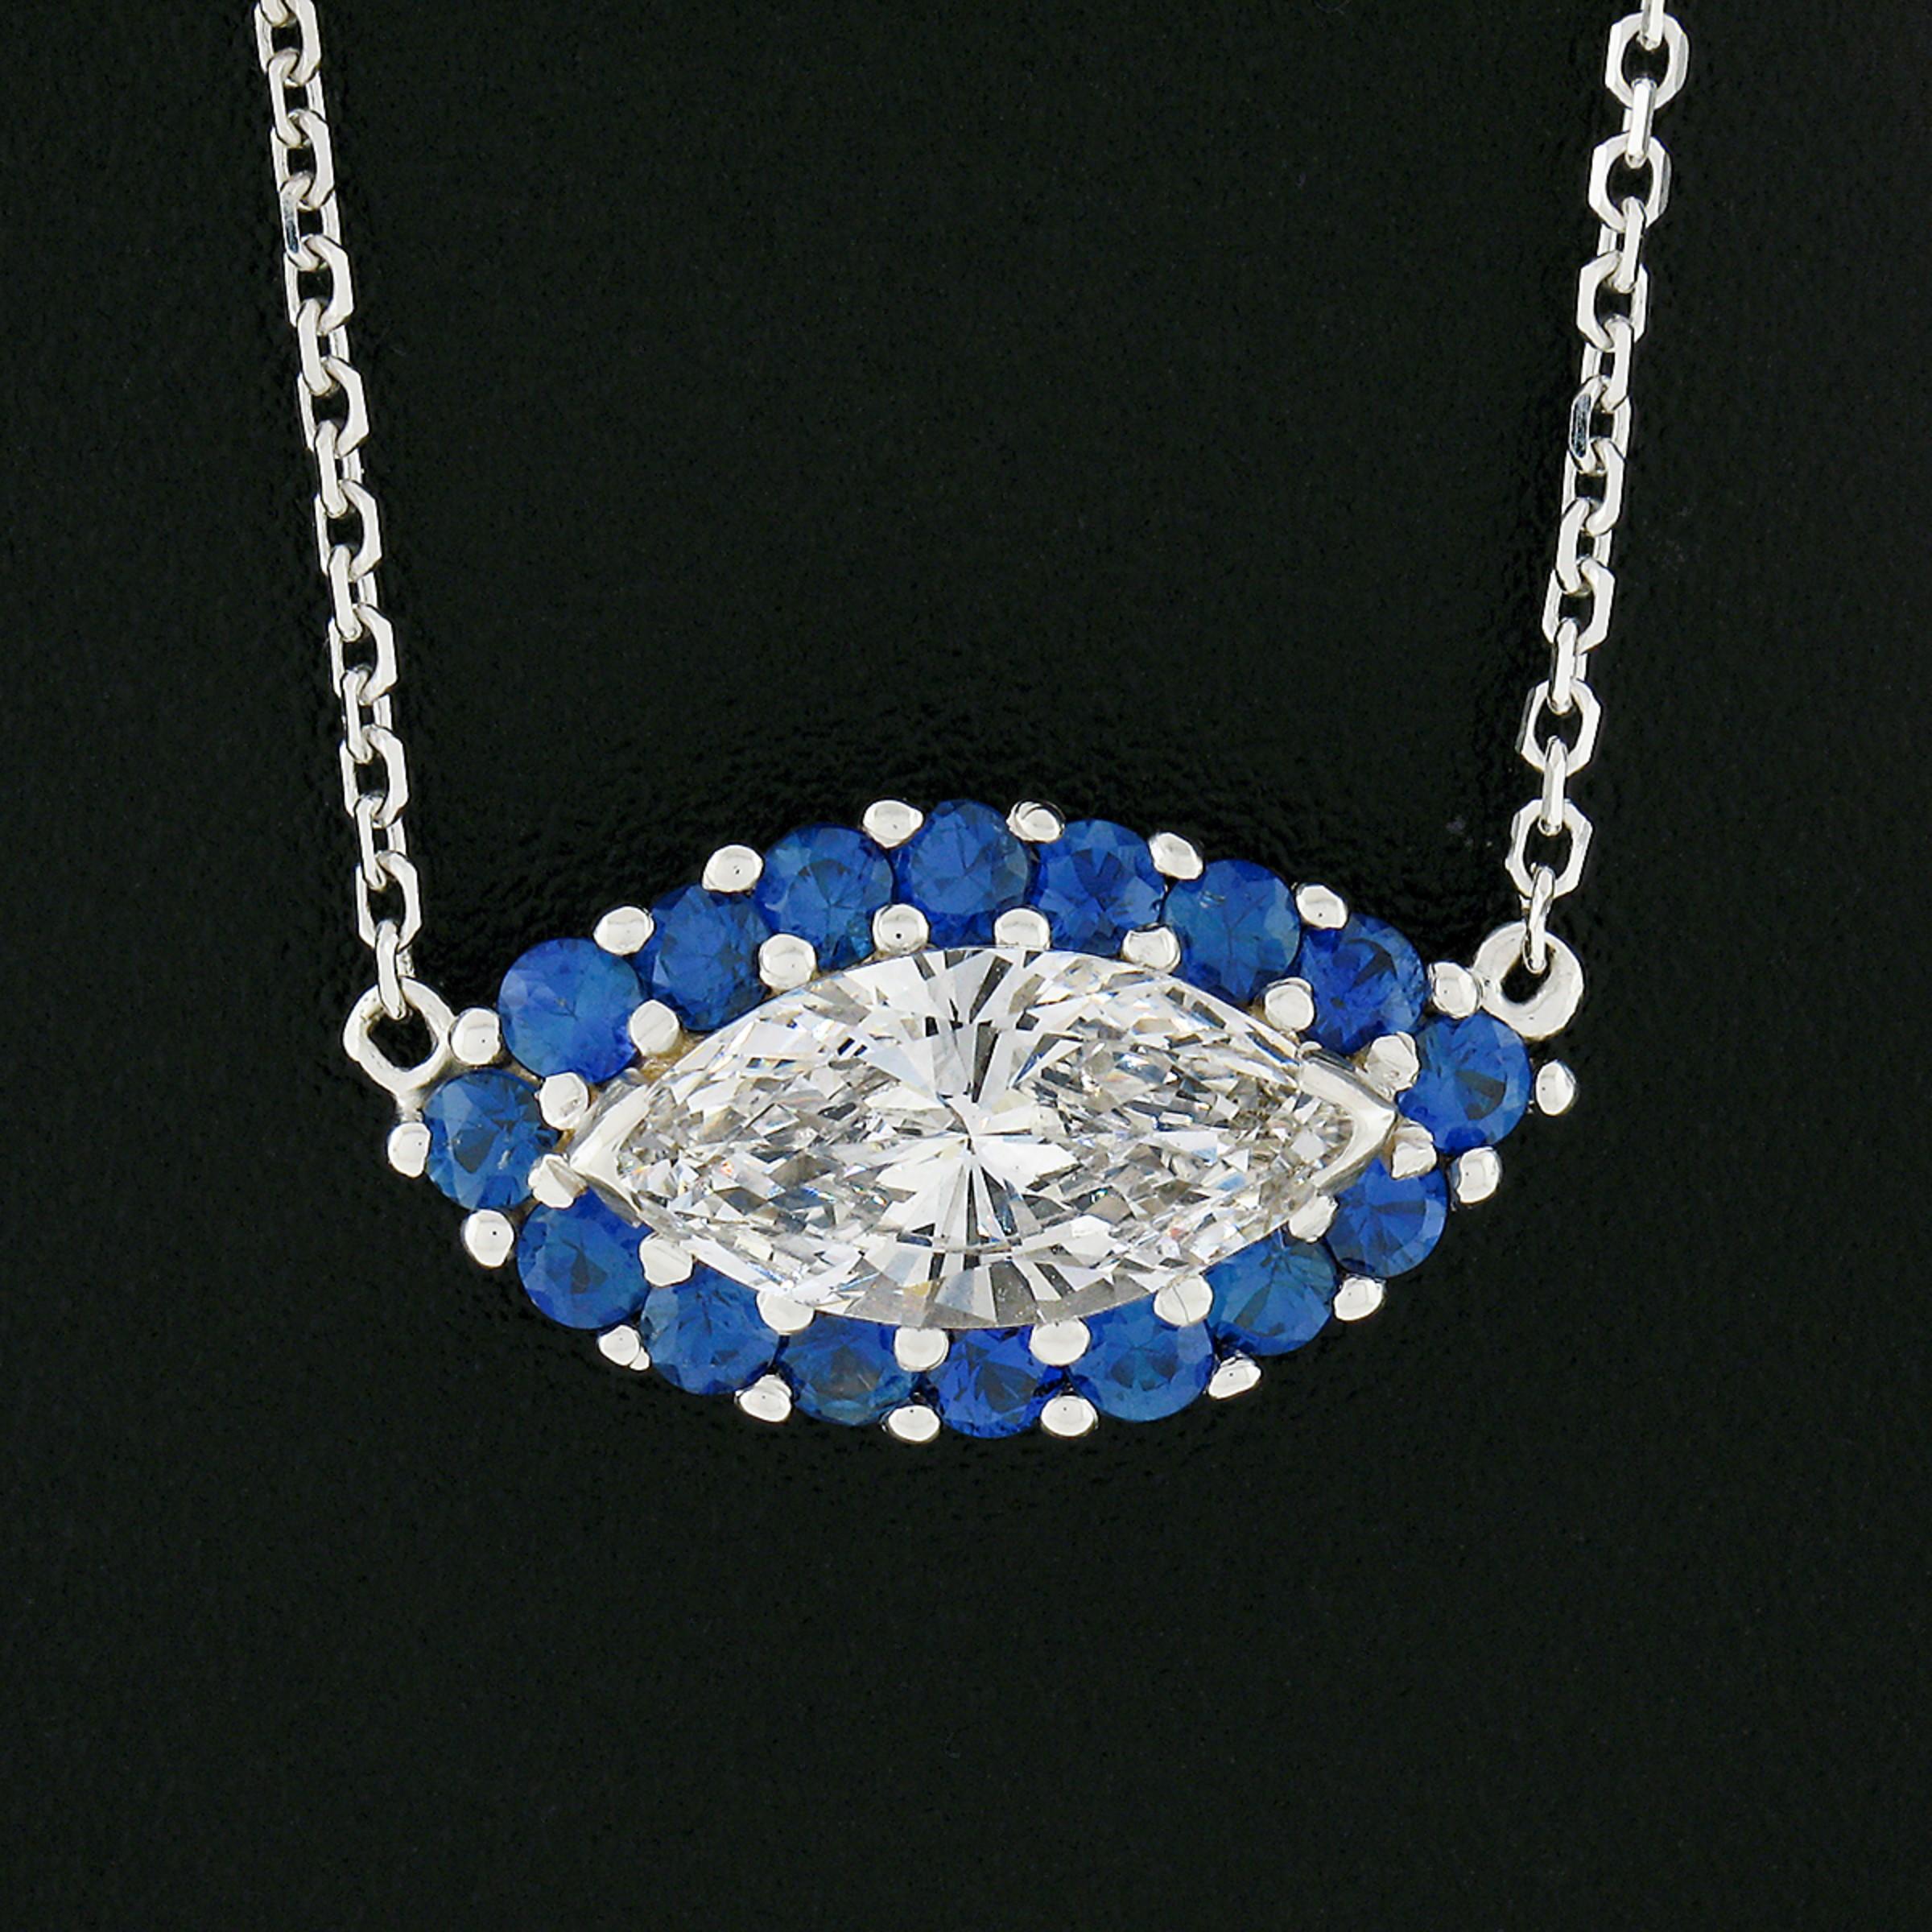 Here we have a gorgeous, brand new, pendant necklace crafted in solid 18k white gold. The necklace features an outstanding evil eye design constructed from a very fine, GIA certified, marquise brilliant cut diamond solitaire neatly set at the center